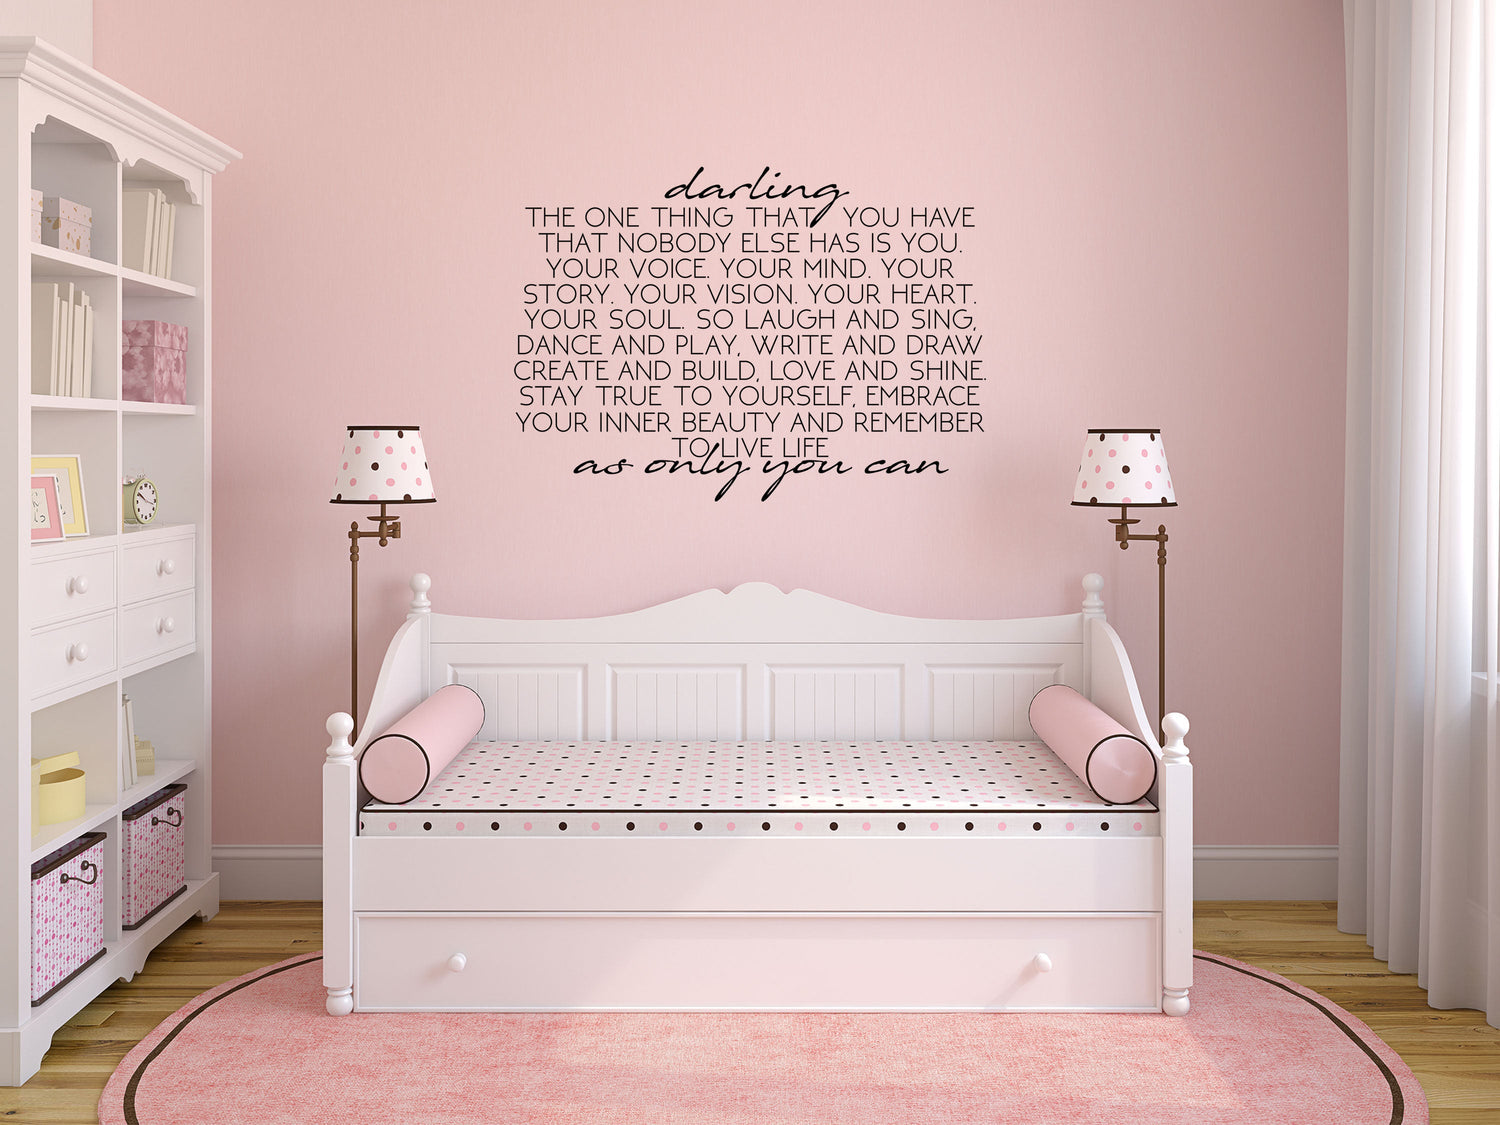 Our Family Moments to Love and Cherish Quotes Living Room Wall